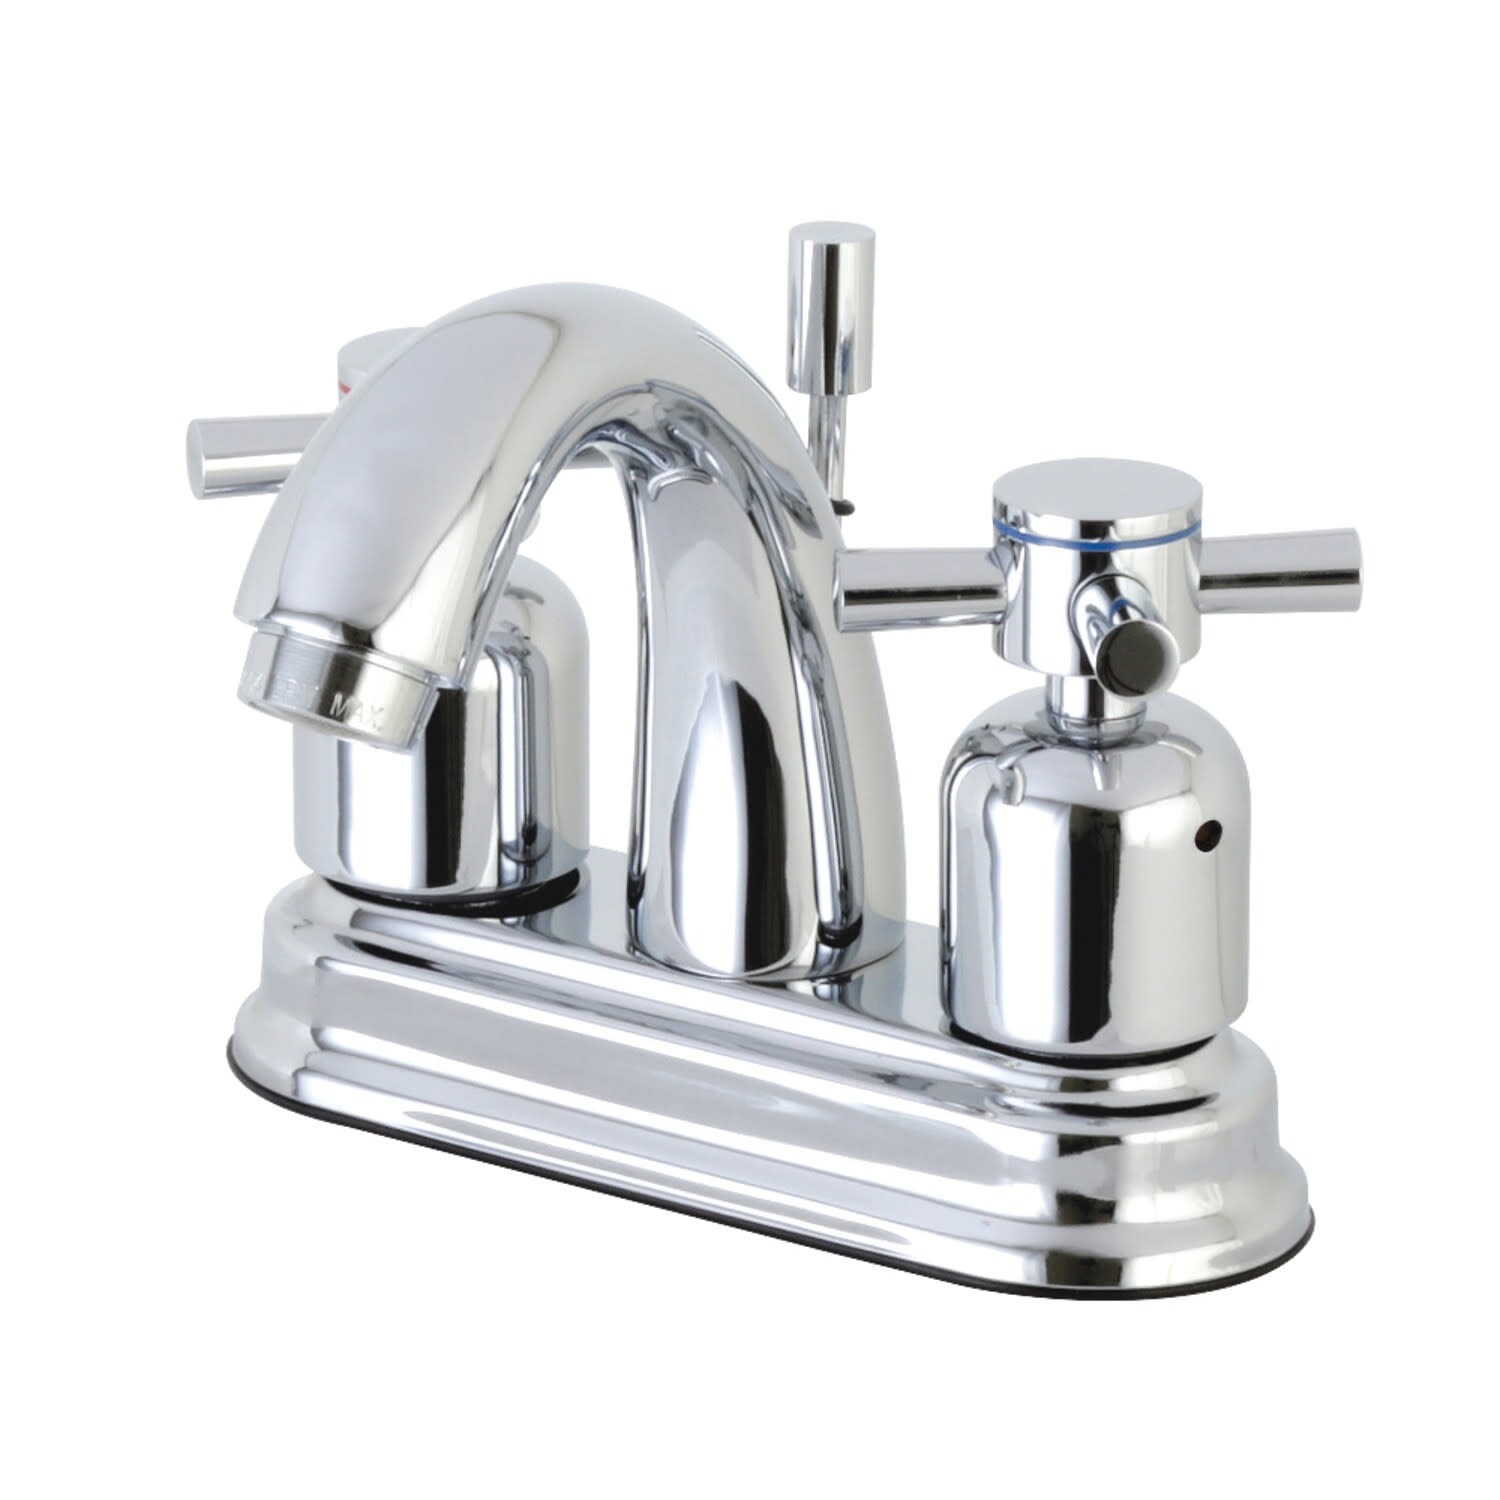 Kingston Brass Concord 1.2 GPM Centerset Bathroom Faucet with Pop-Up